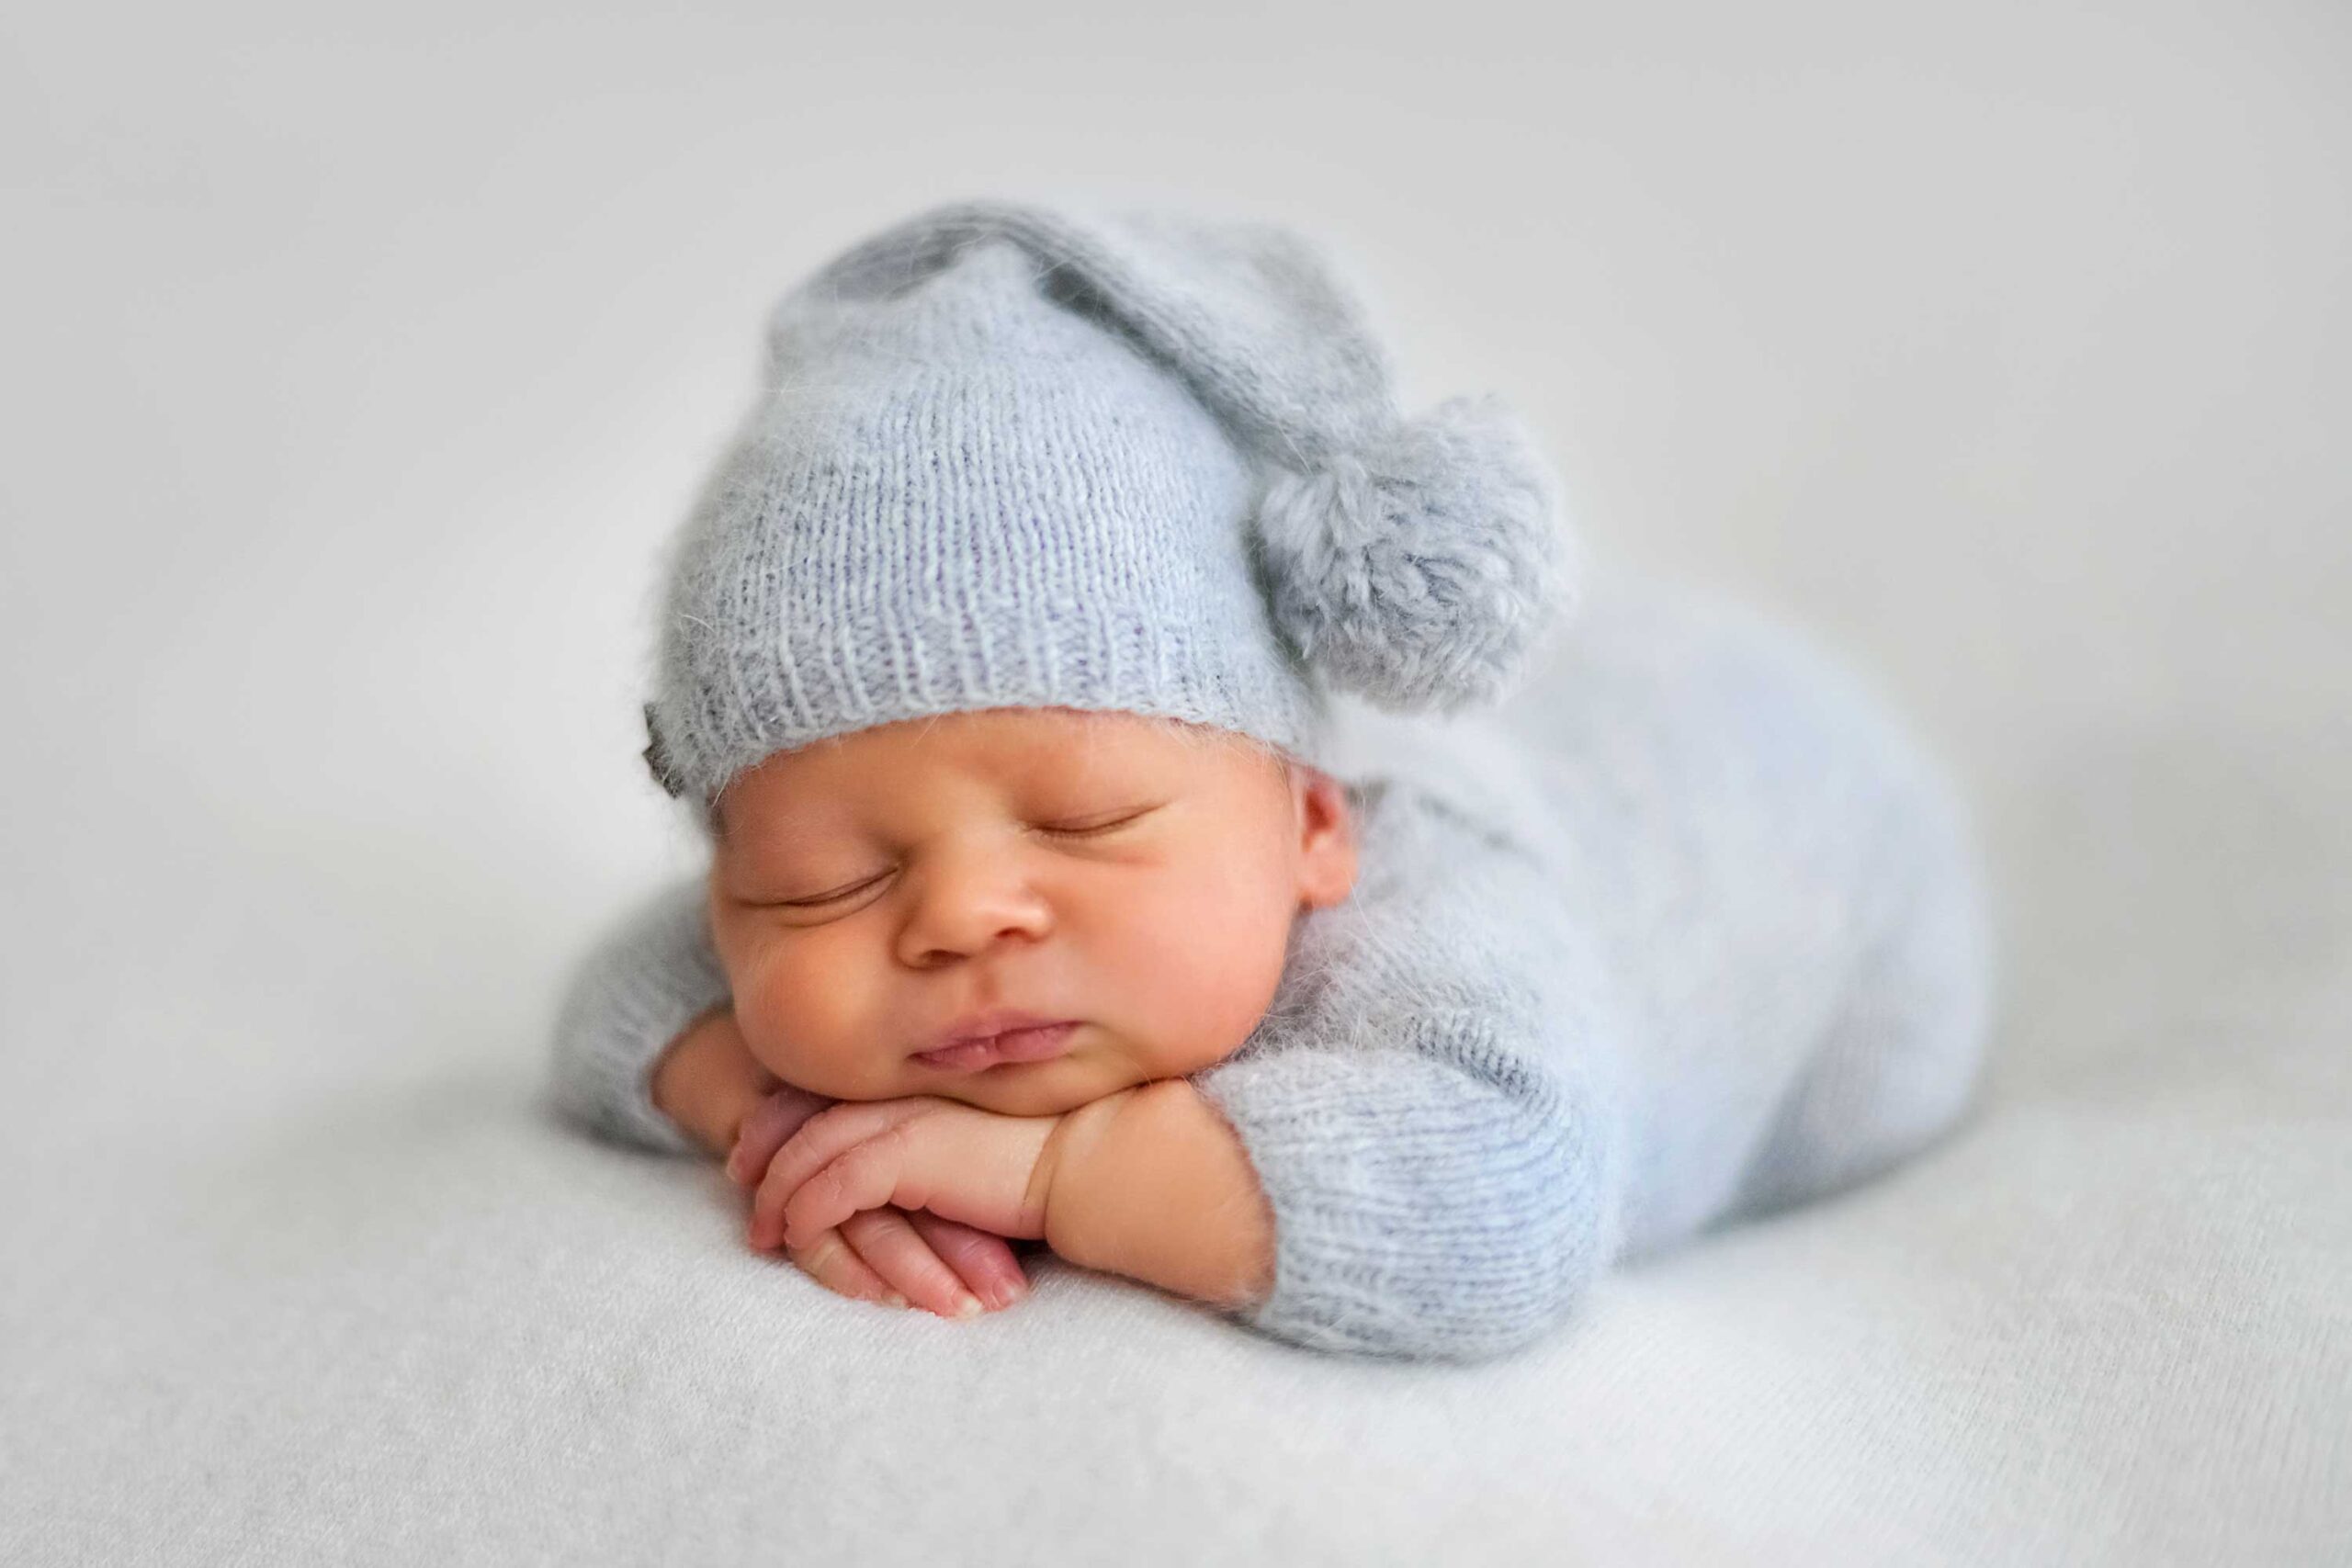 Sleeping baby conceived through natural cycle VF, a low IVF cost option | Tennessee Reproductive Medicine | Chattanooga, TN